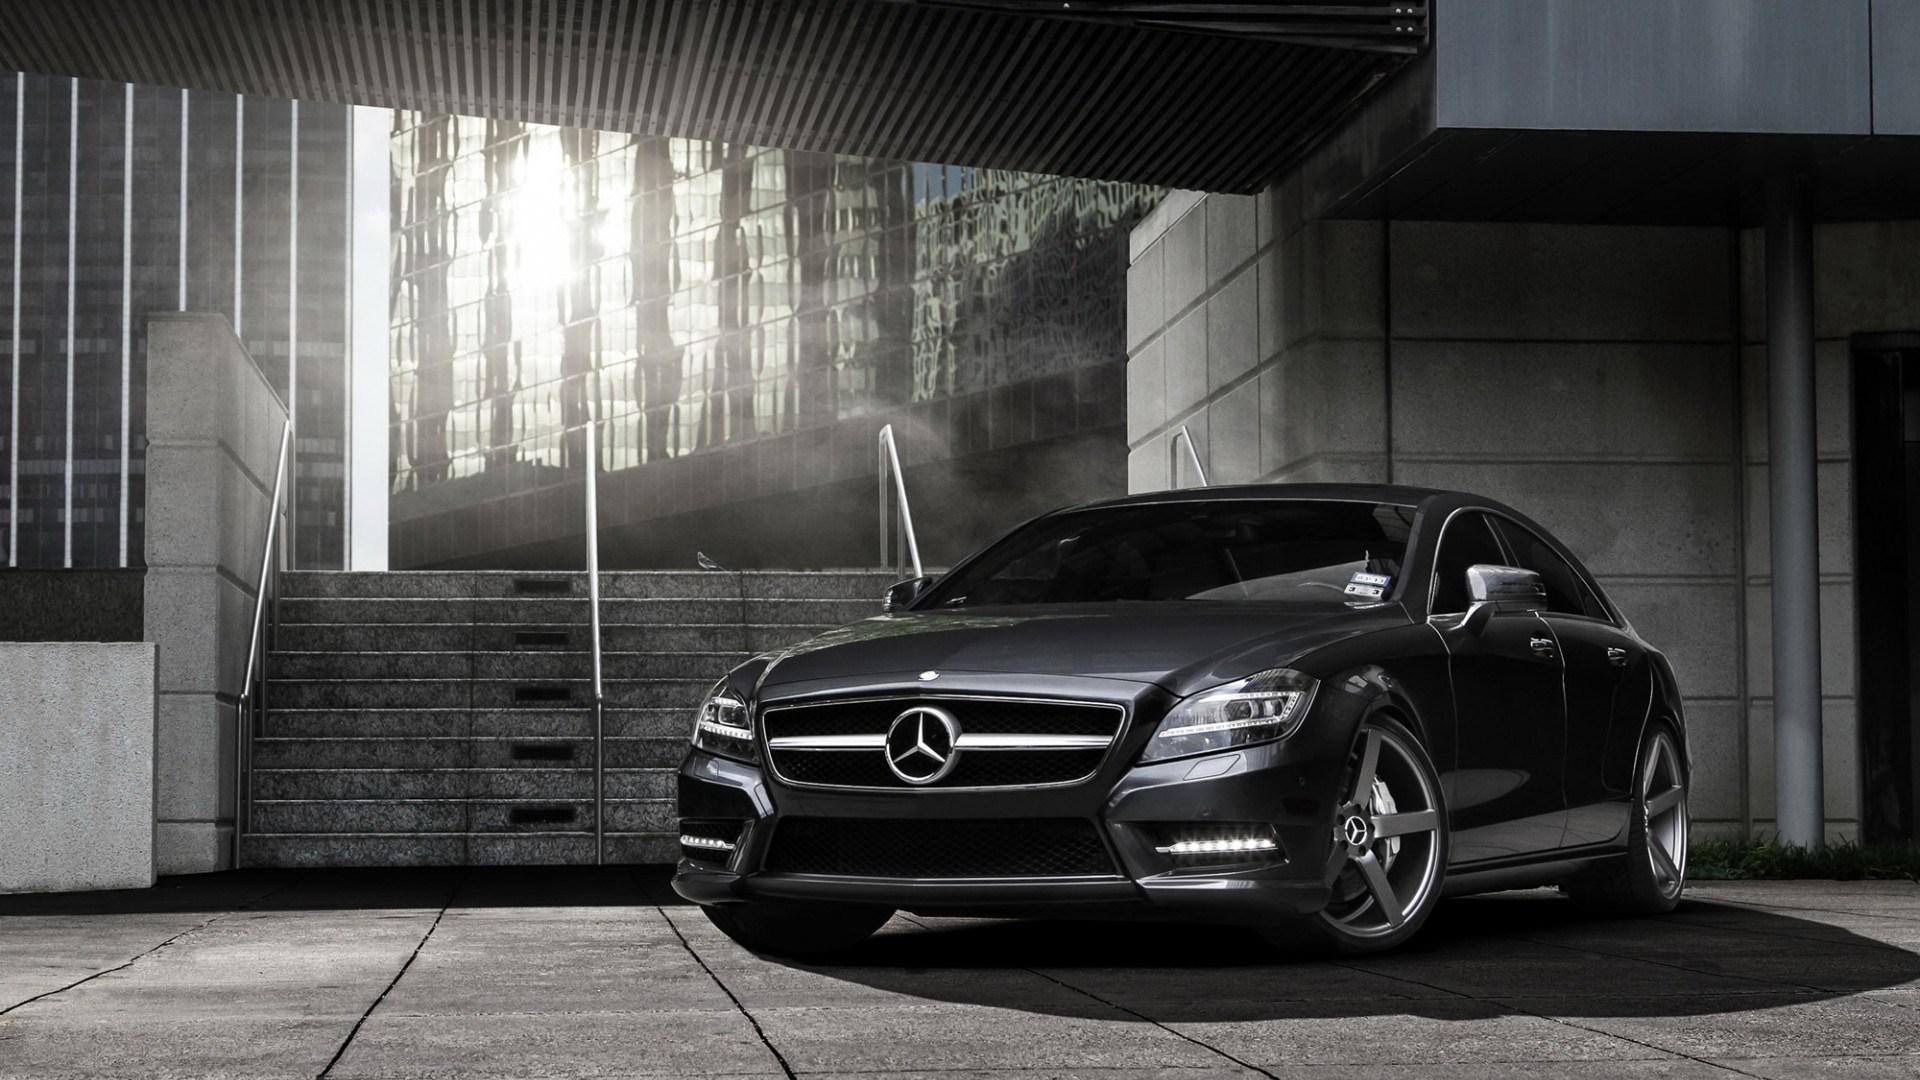 Mercedes-Benz CLS, The pickootech, Distinctive style, Automotive luxury, 1920x1080 Full HD Desktop